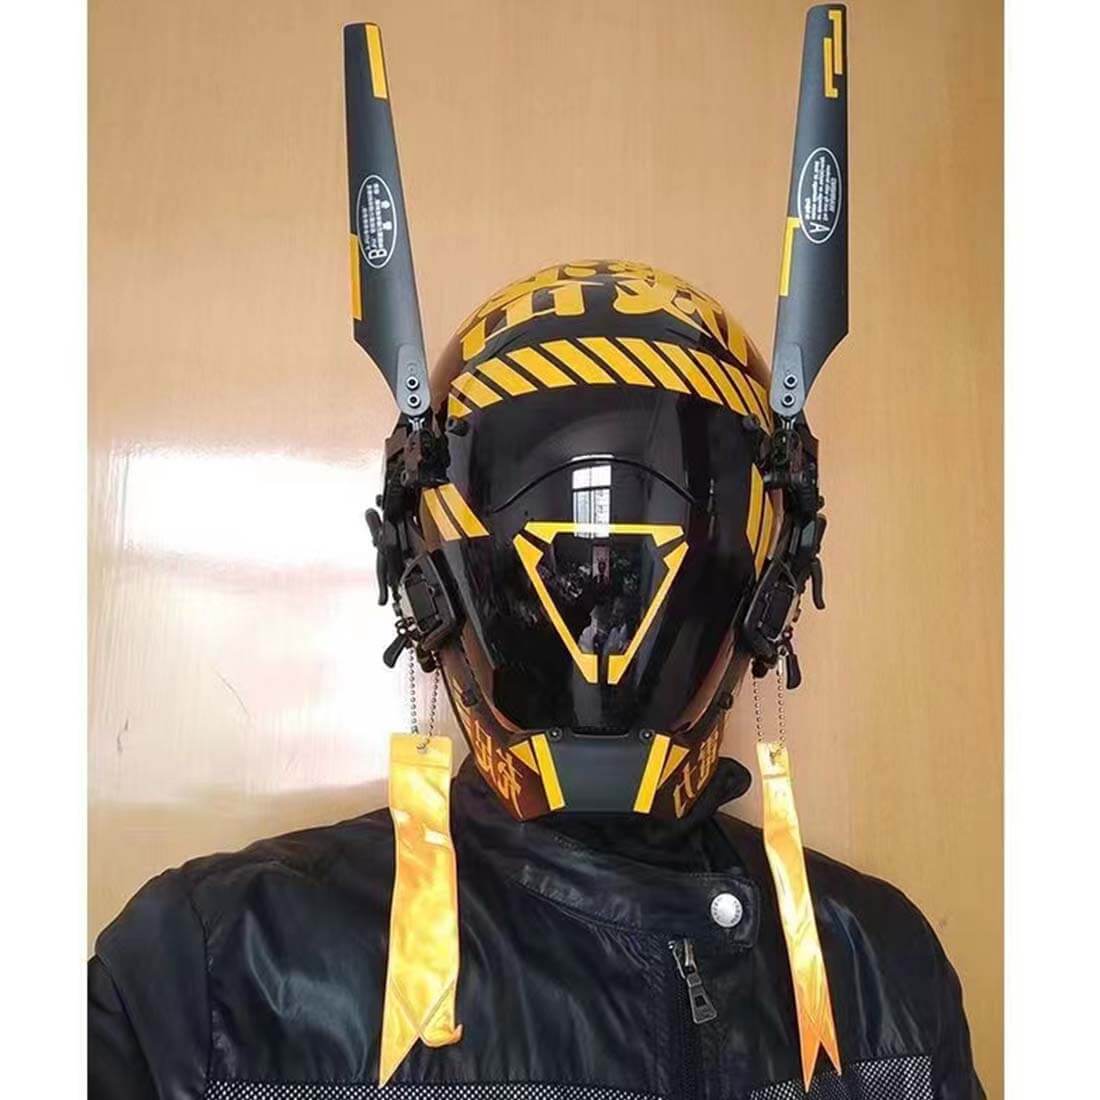 Future Cyberpunk Tactical Helmet Mask Cosplay Costume Props with